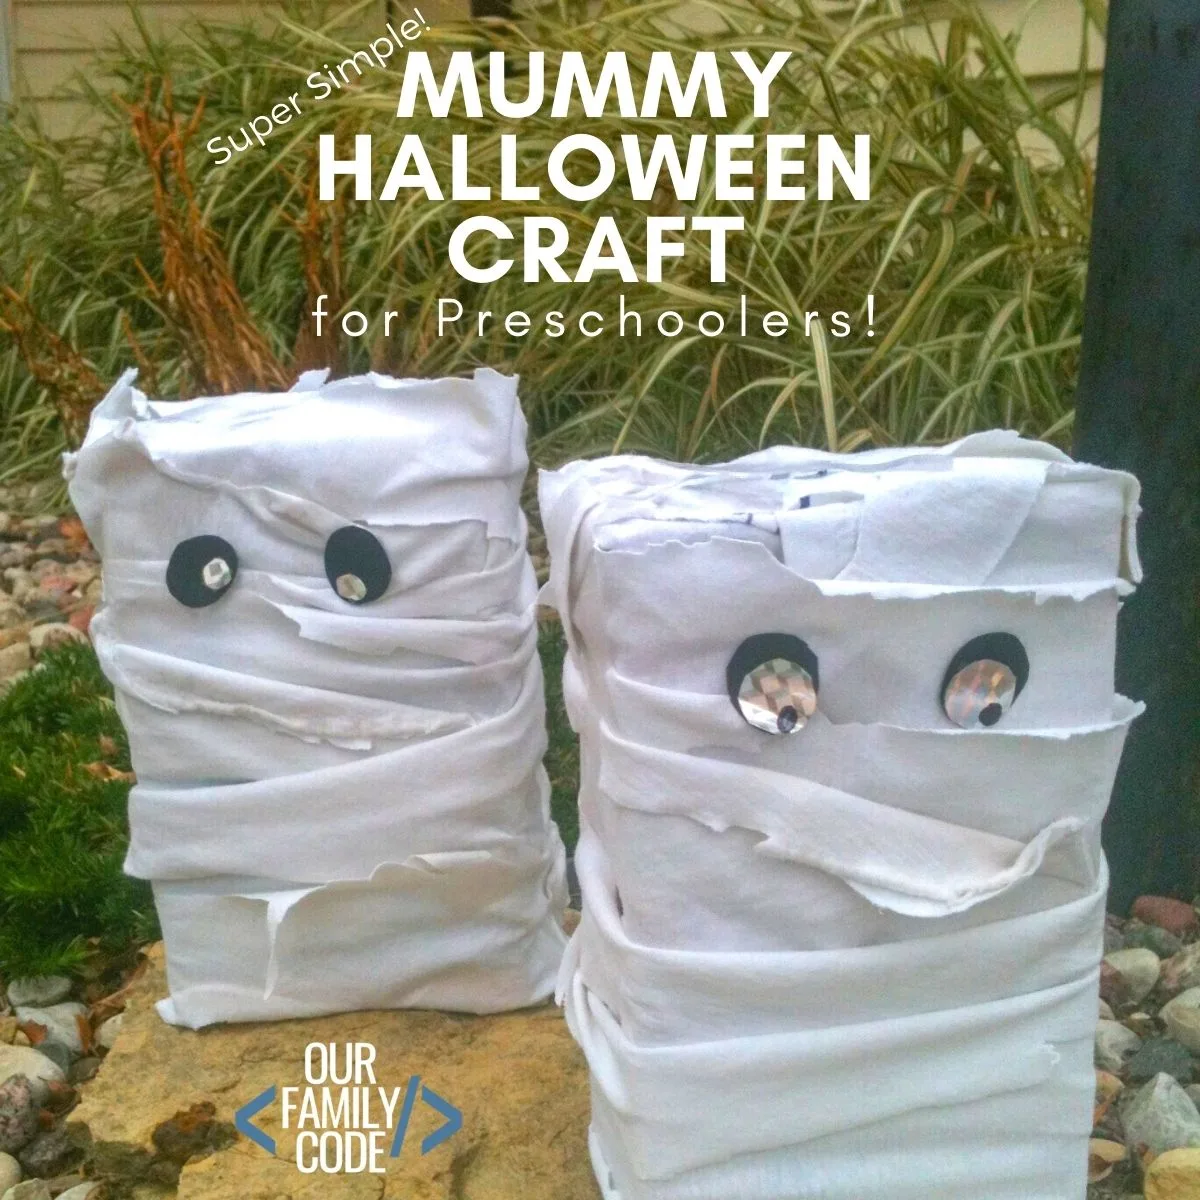 This easy Halloween craft for preschoolers is perfect for those busy days when you are looking for a simple project to do with your kiddo. The end result is a super cute Halloween decoration that you can put outside or display inside your house. #preschoolcraft #halloweenkidcrafts #kidcraftsforhalloween #easypreschoolercrafts #halloweencrafts #mummyhalloweencraft #DIYhalloweendecoration #easyHalloweendecoration #makeaMummy #MummyHalloweenCraft #easyhalloweencraftforpreschoolers #kidcrafts